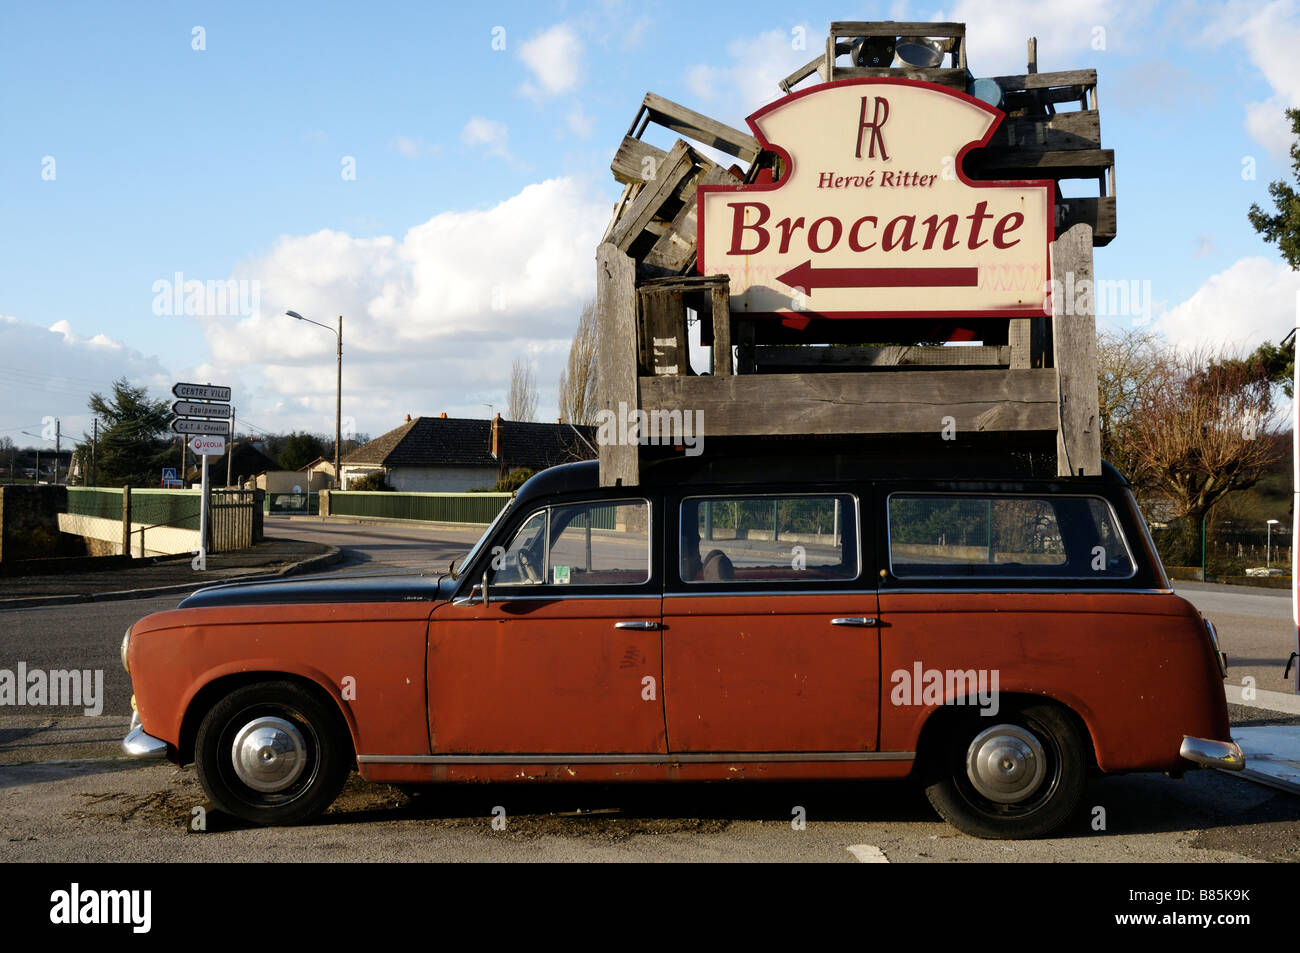 Stock photo of an old Peugeot 403 piled high with bric a brac The car is advertising a local Brocante shop in Bellac France Stock Photo